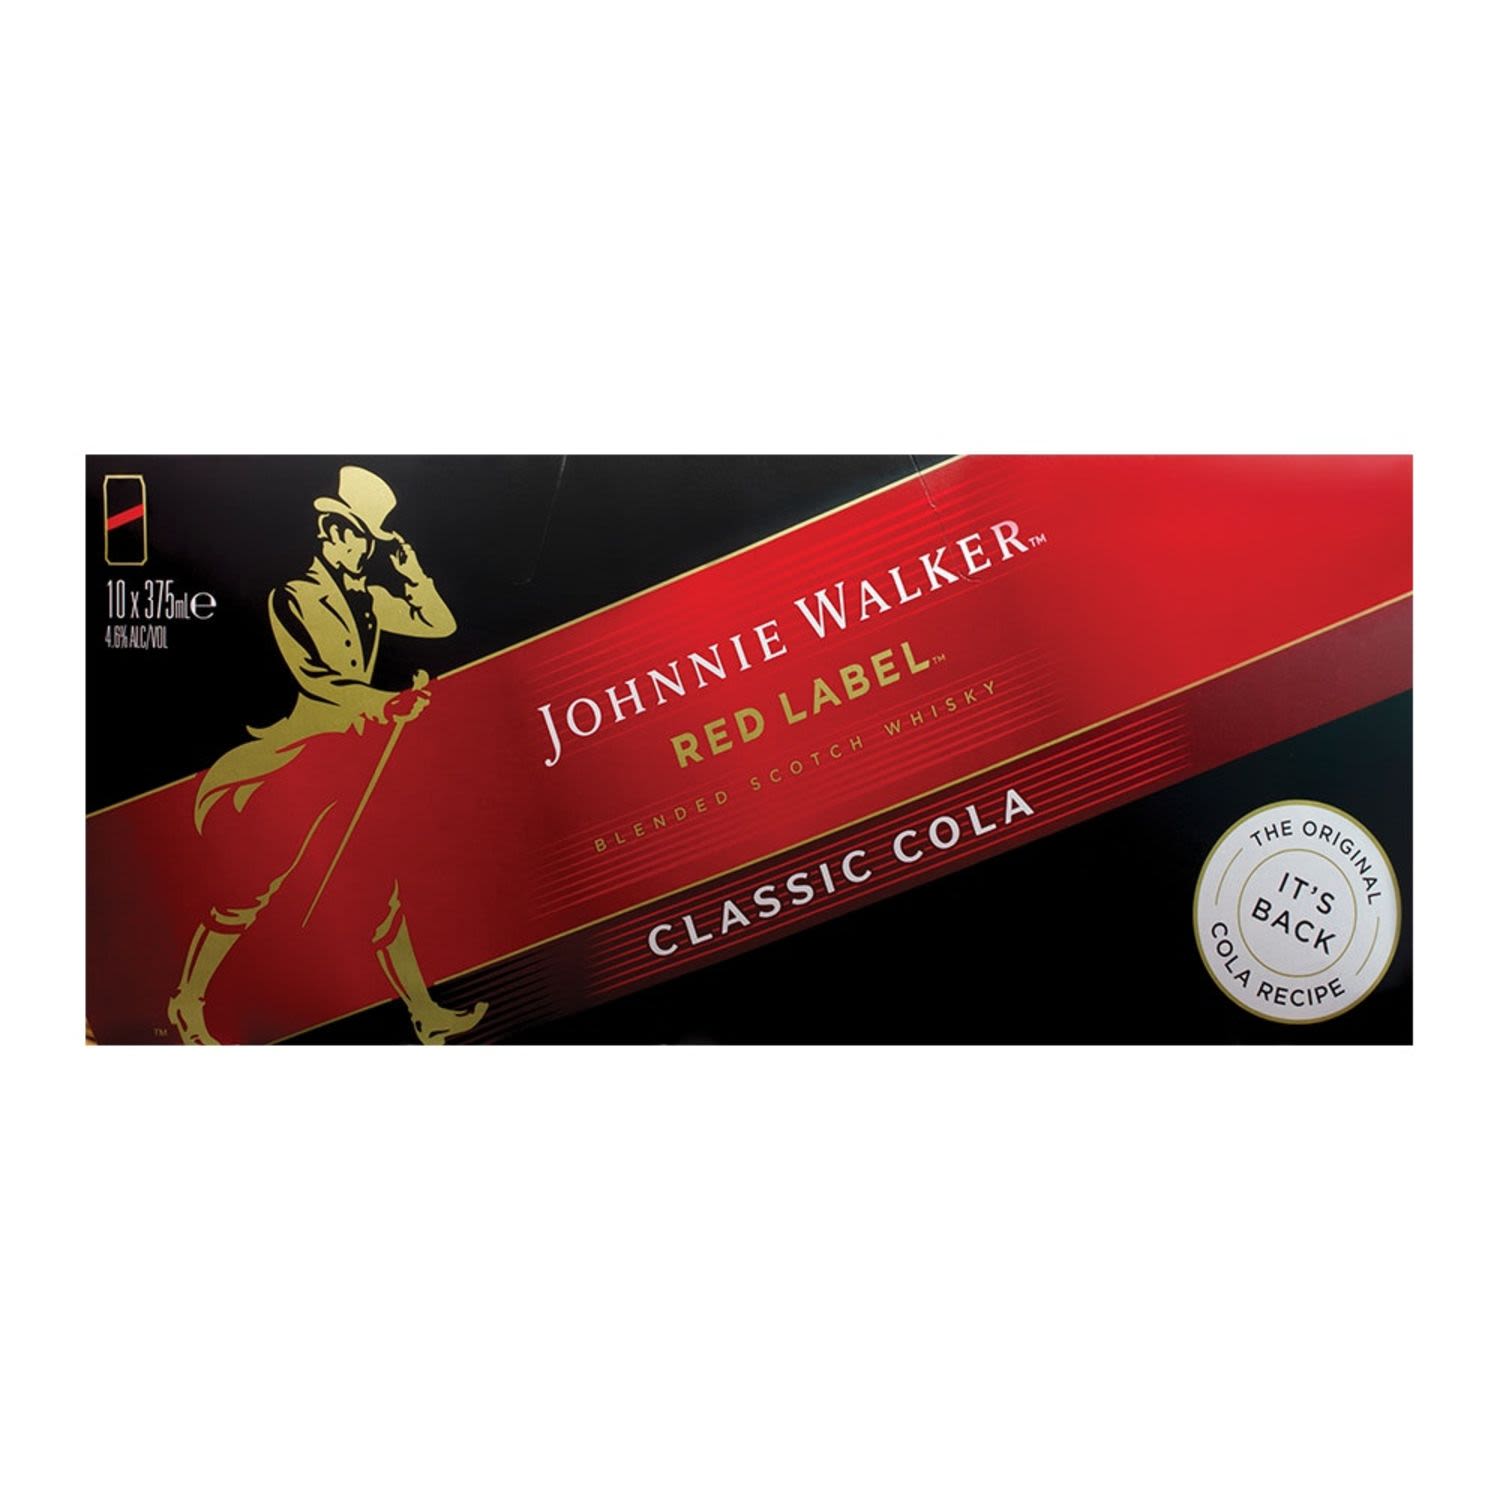 Johnnie Walker Red Label & Cola 4.6% Can 375mL 10 Pack